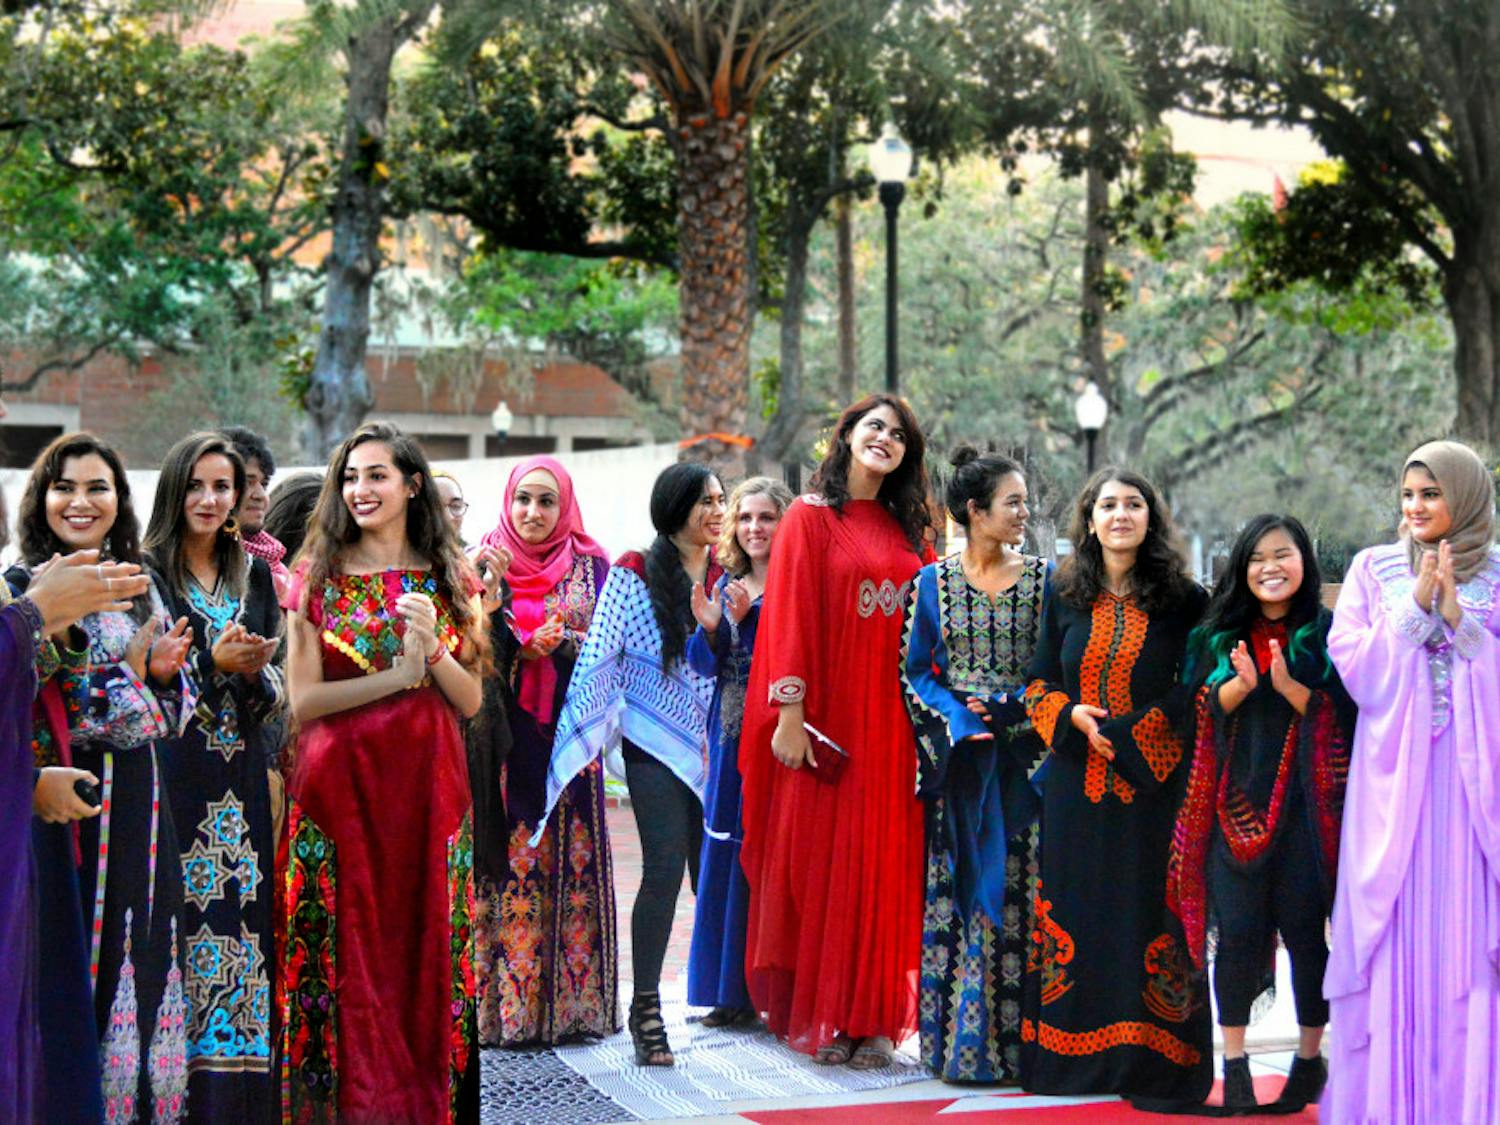 Models gather at the end of a makeshift runway on the Plaza of the Americas following a fashion show hosted by UF Students for Justice in Palestine. The show was the organization’s first event of the Fall semester and showcased traditional Arab clothing.